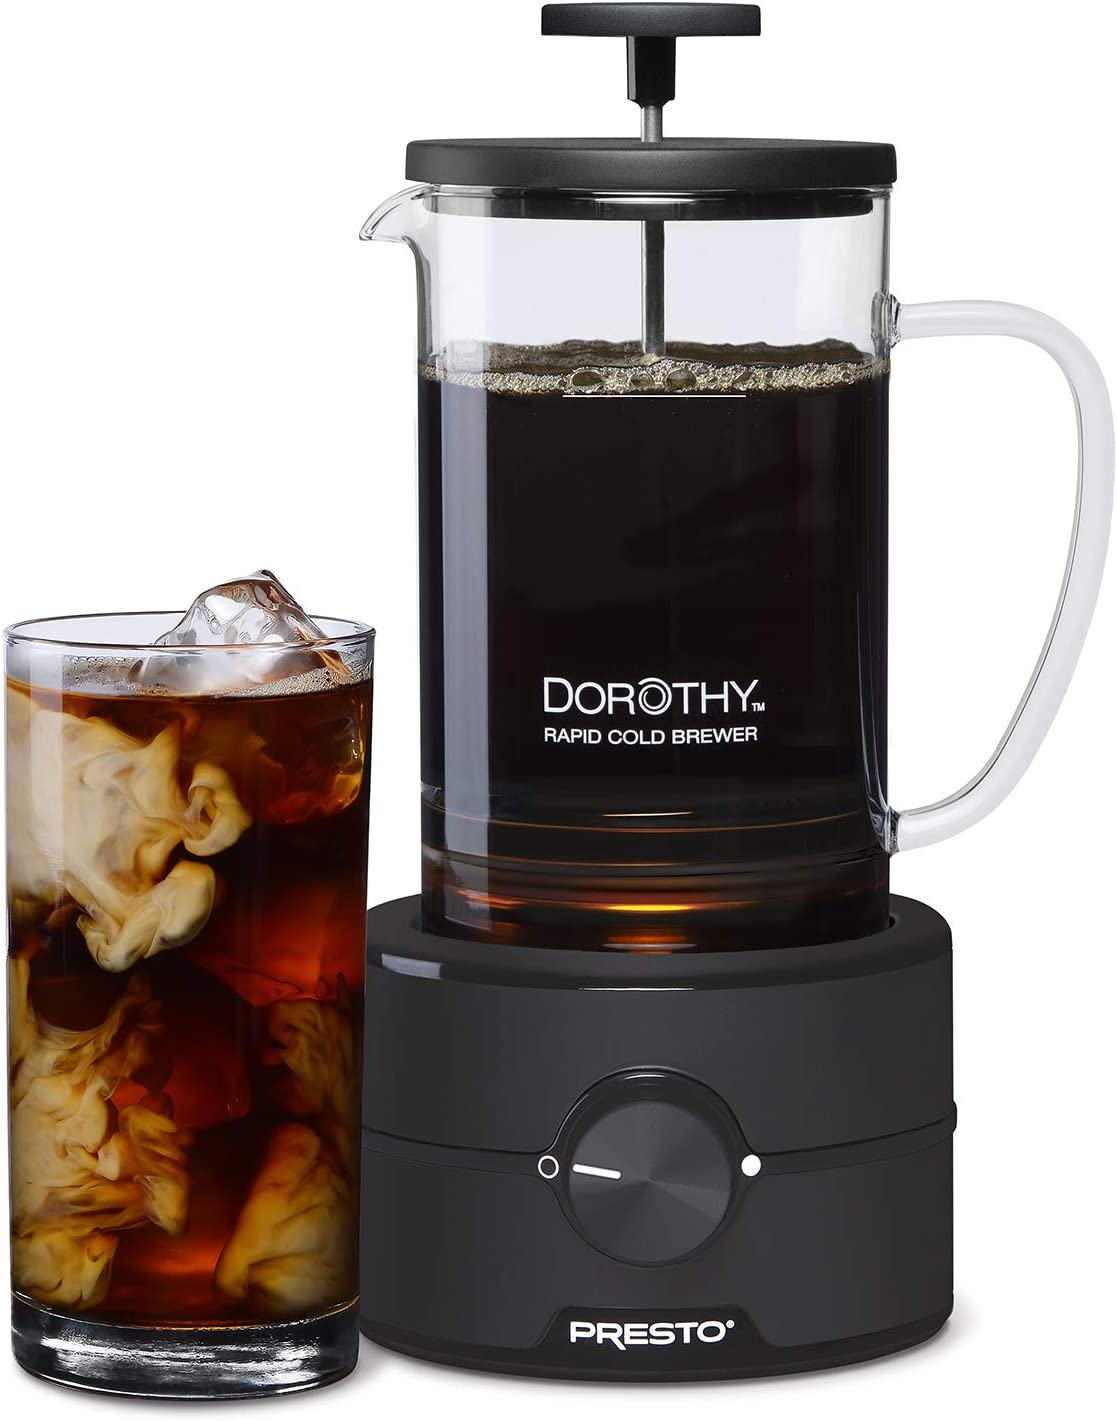 Presto Dorothy Electric Rapid Cold Brewer $26 + Free Shipping